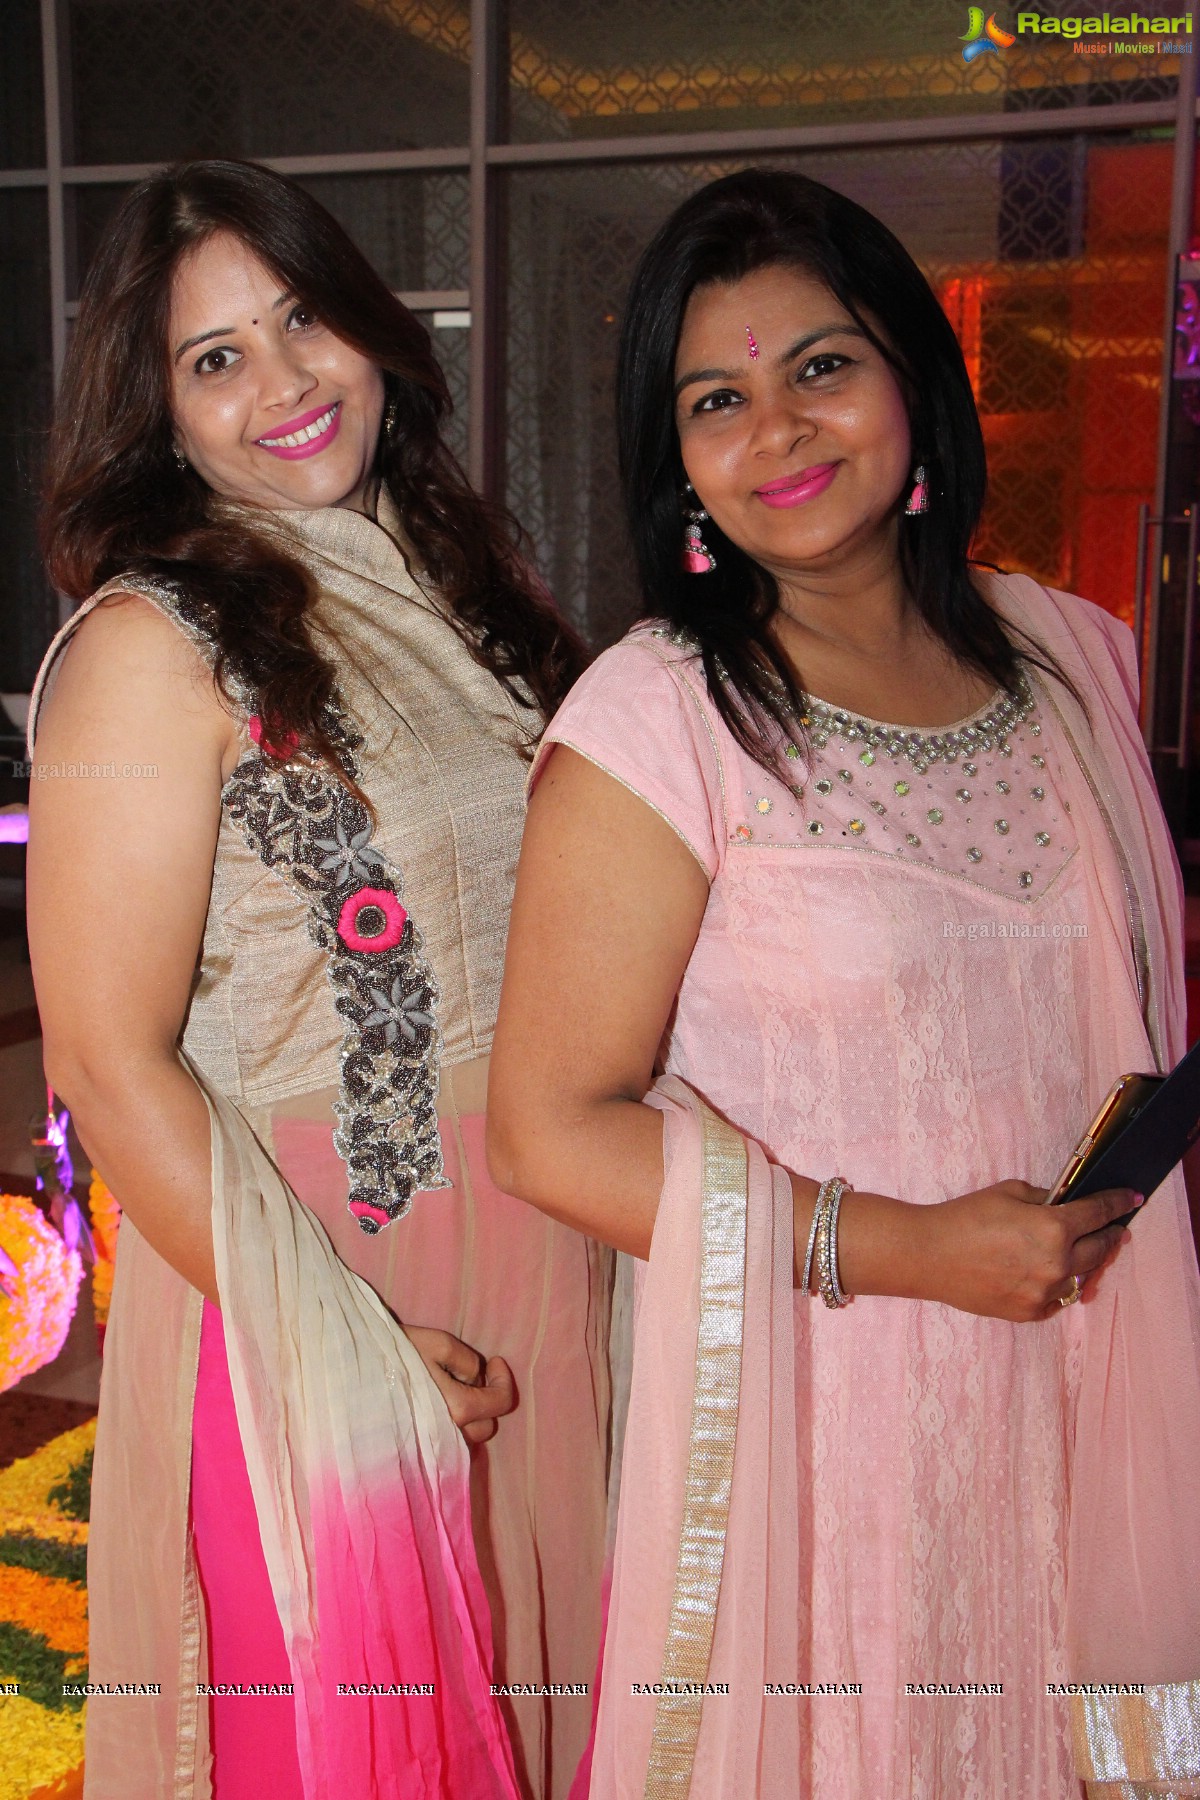 Cradle Ceremony of Urvik Khandelwal - Hosted by Khandelwal Family at Hotel Sheraton